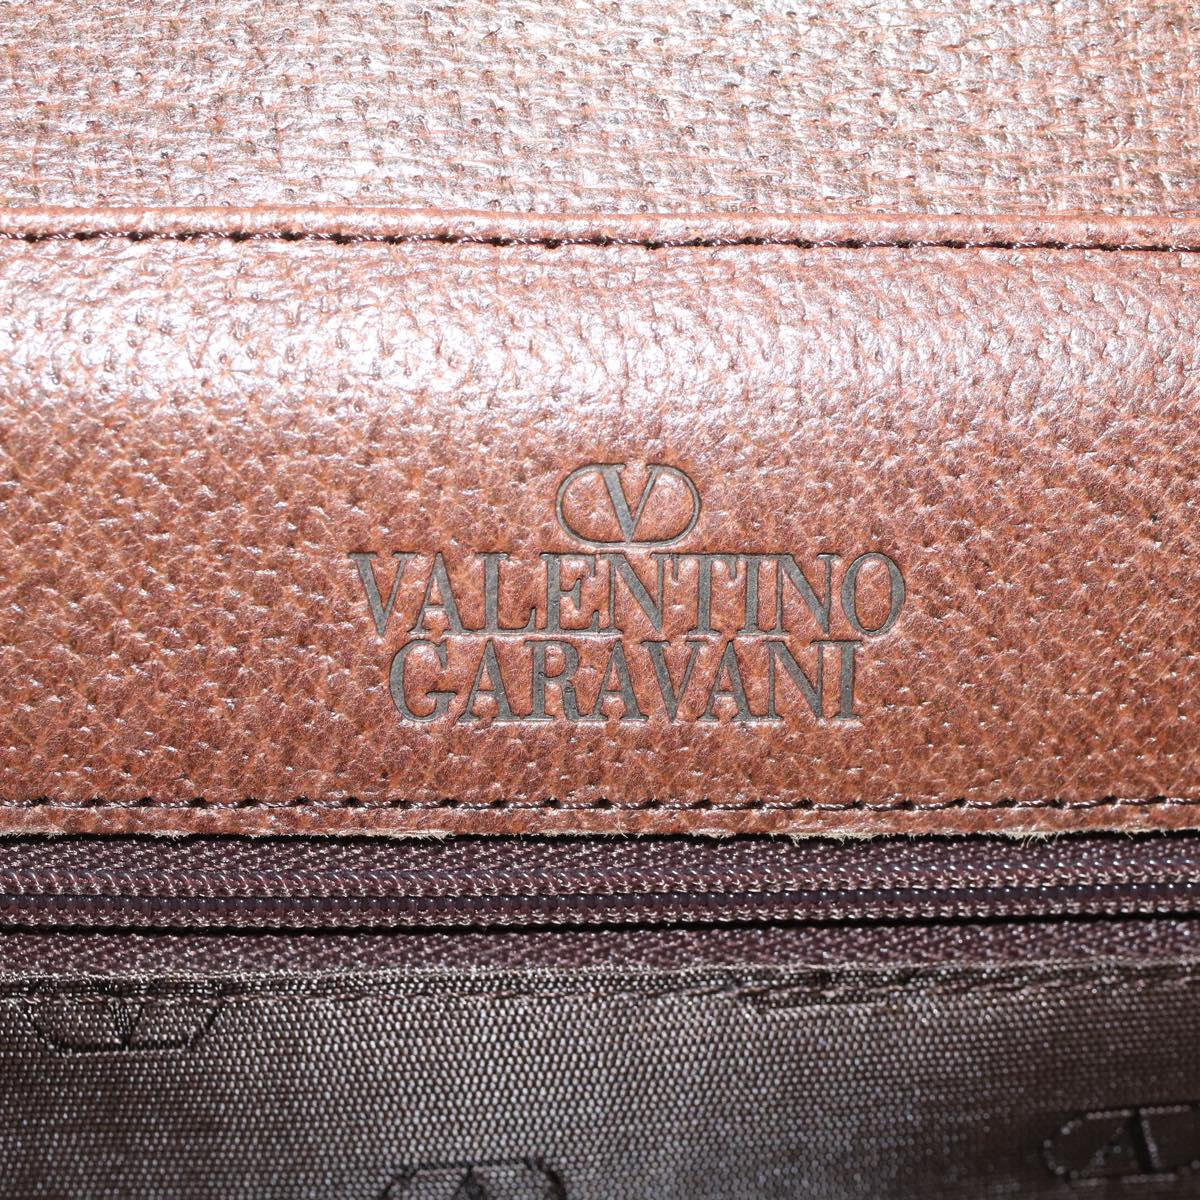 VALENTINO Hand Bag Leather Brown Auth 59910